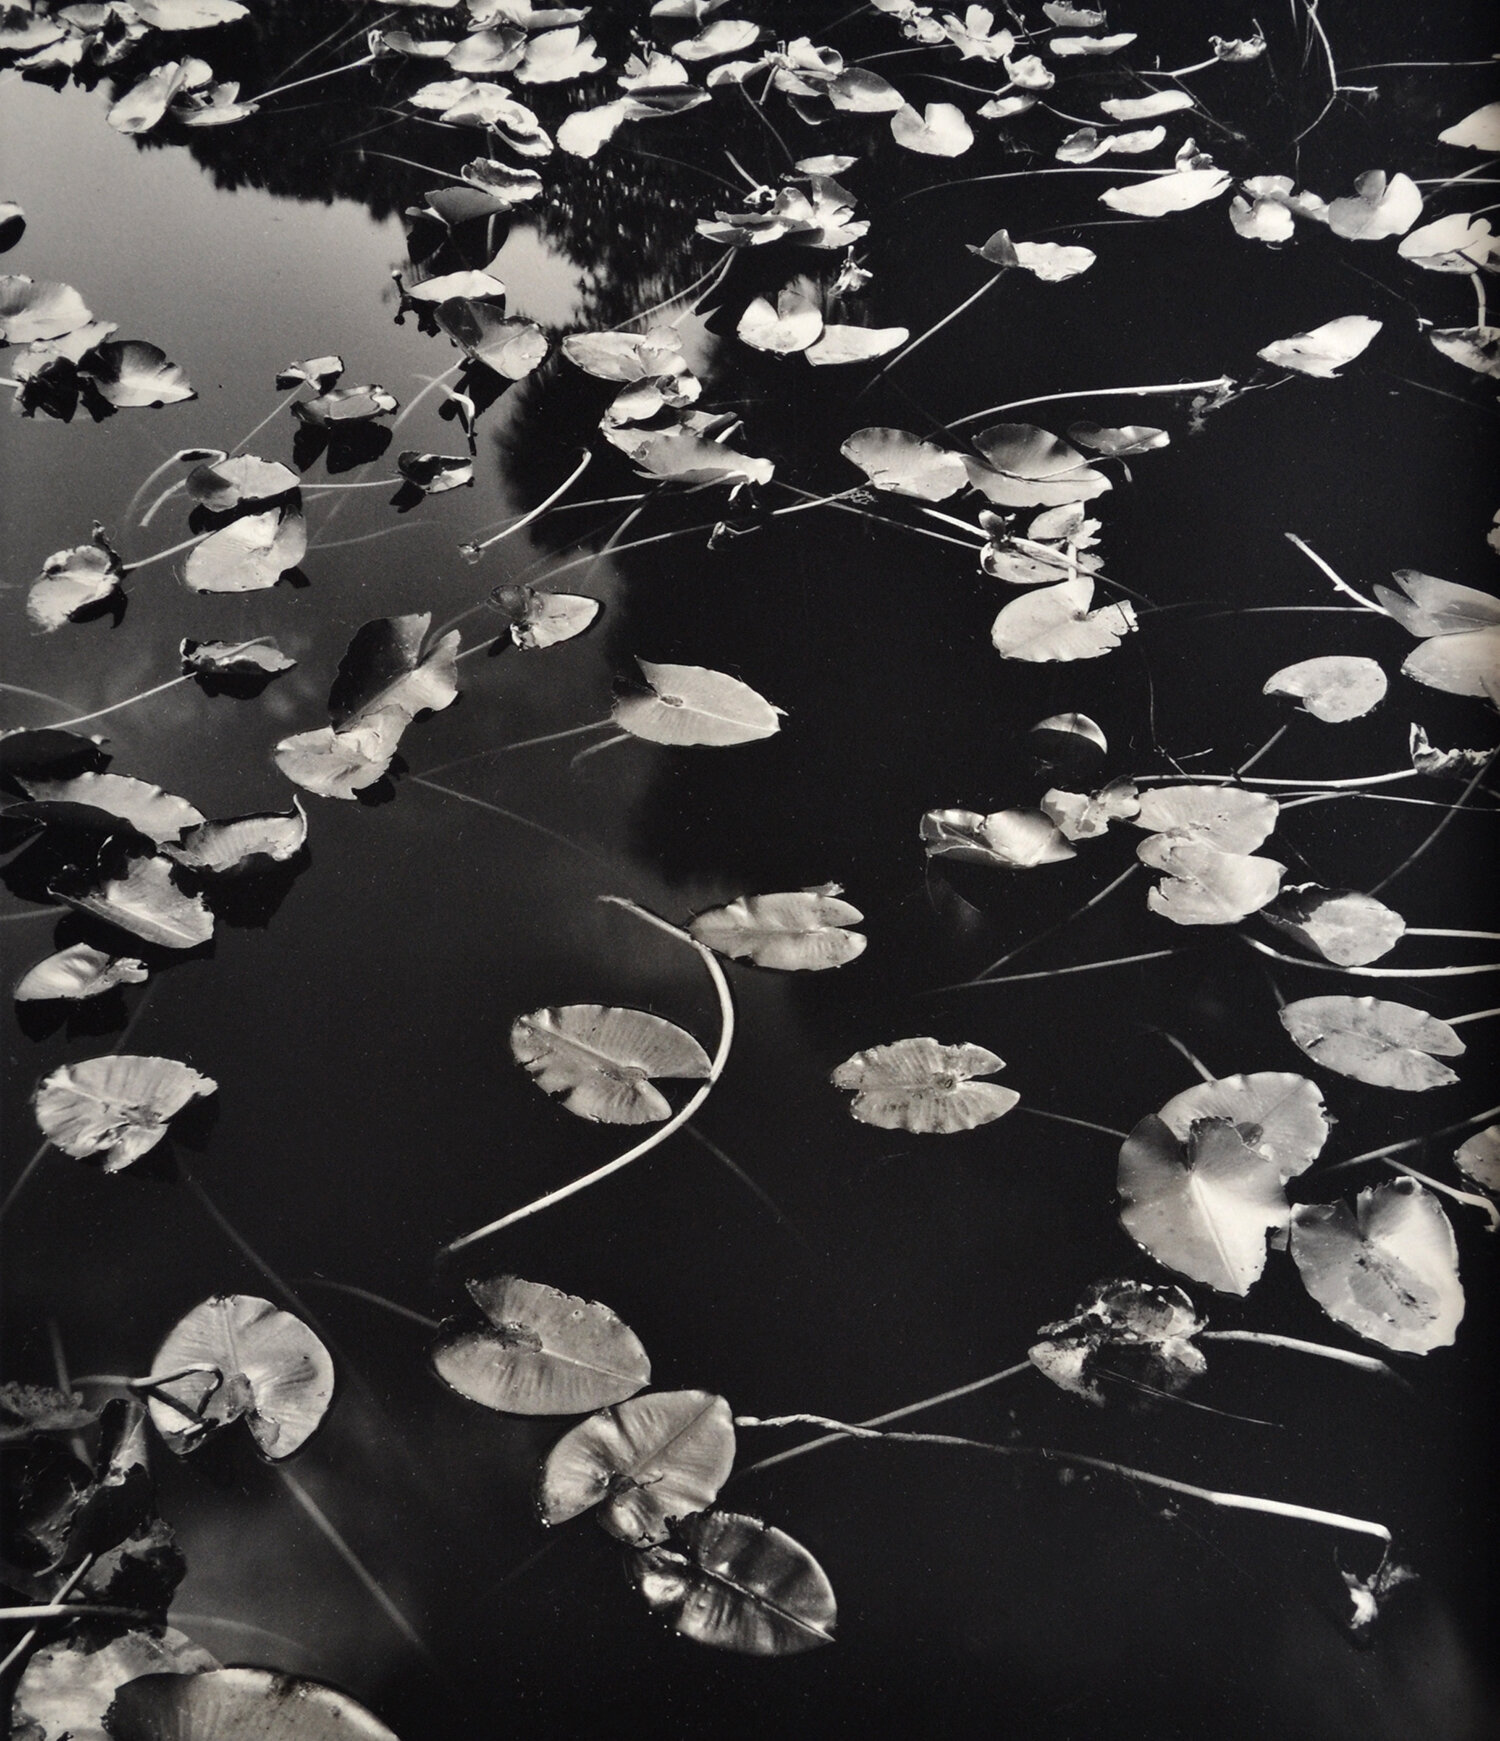 Janet Russek: Chung Fu - Inner Truth: Water Lilies, The Morikami Museum and Japanese Gardens, Florida, 1997